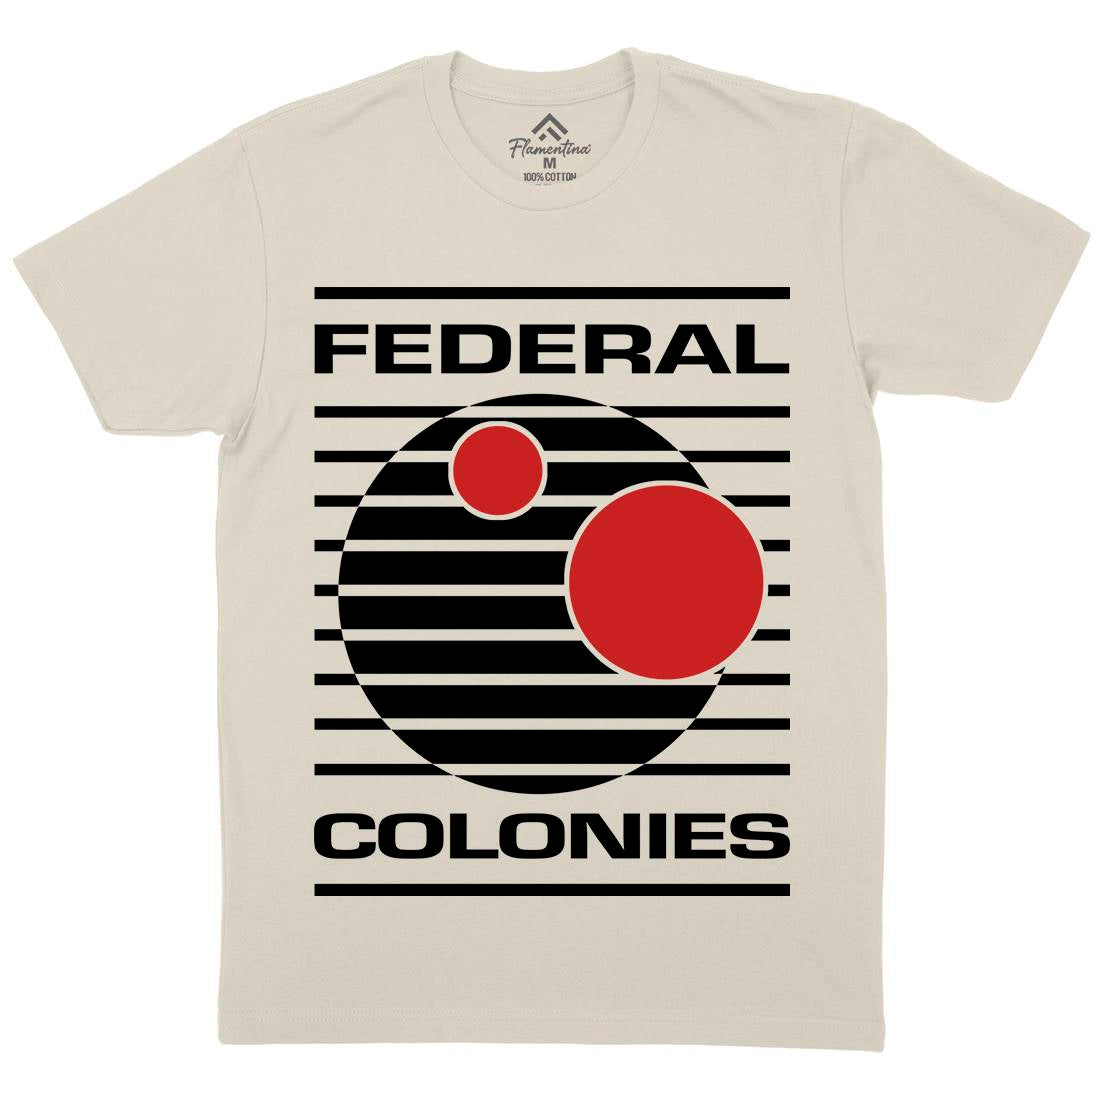 Federal Colonies Mens Organic Crew Neck T-Shirt Space D409